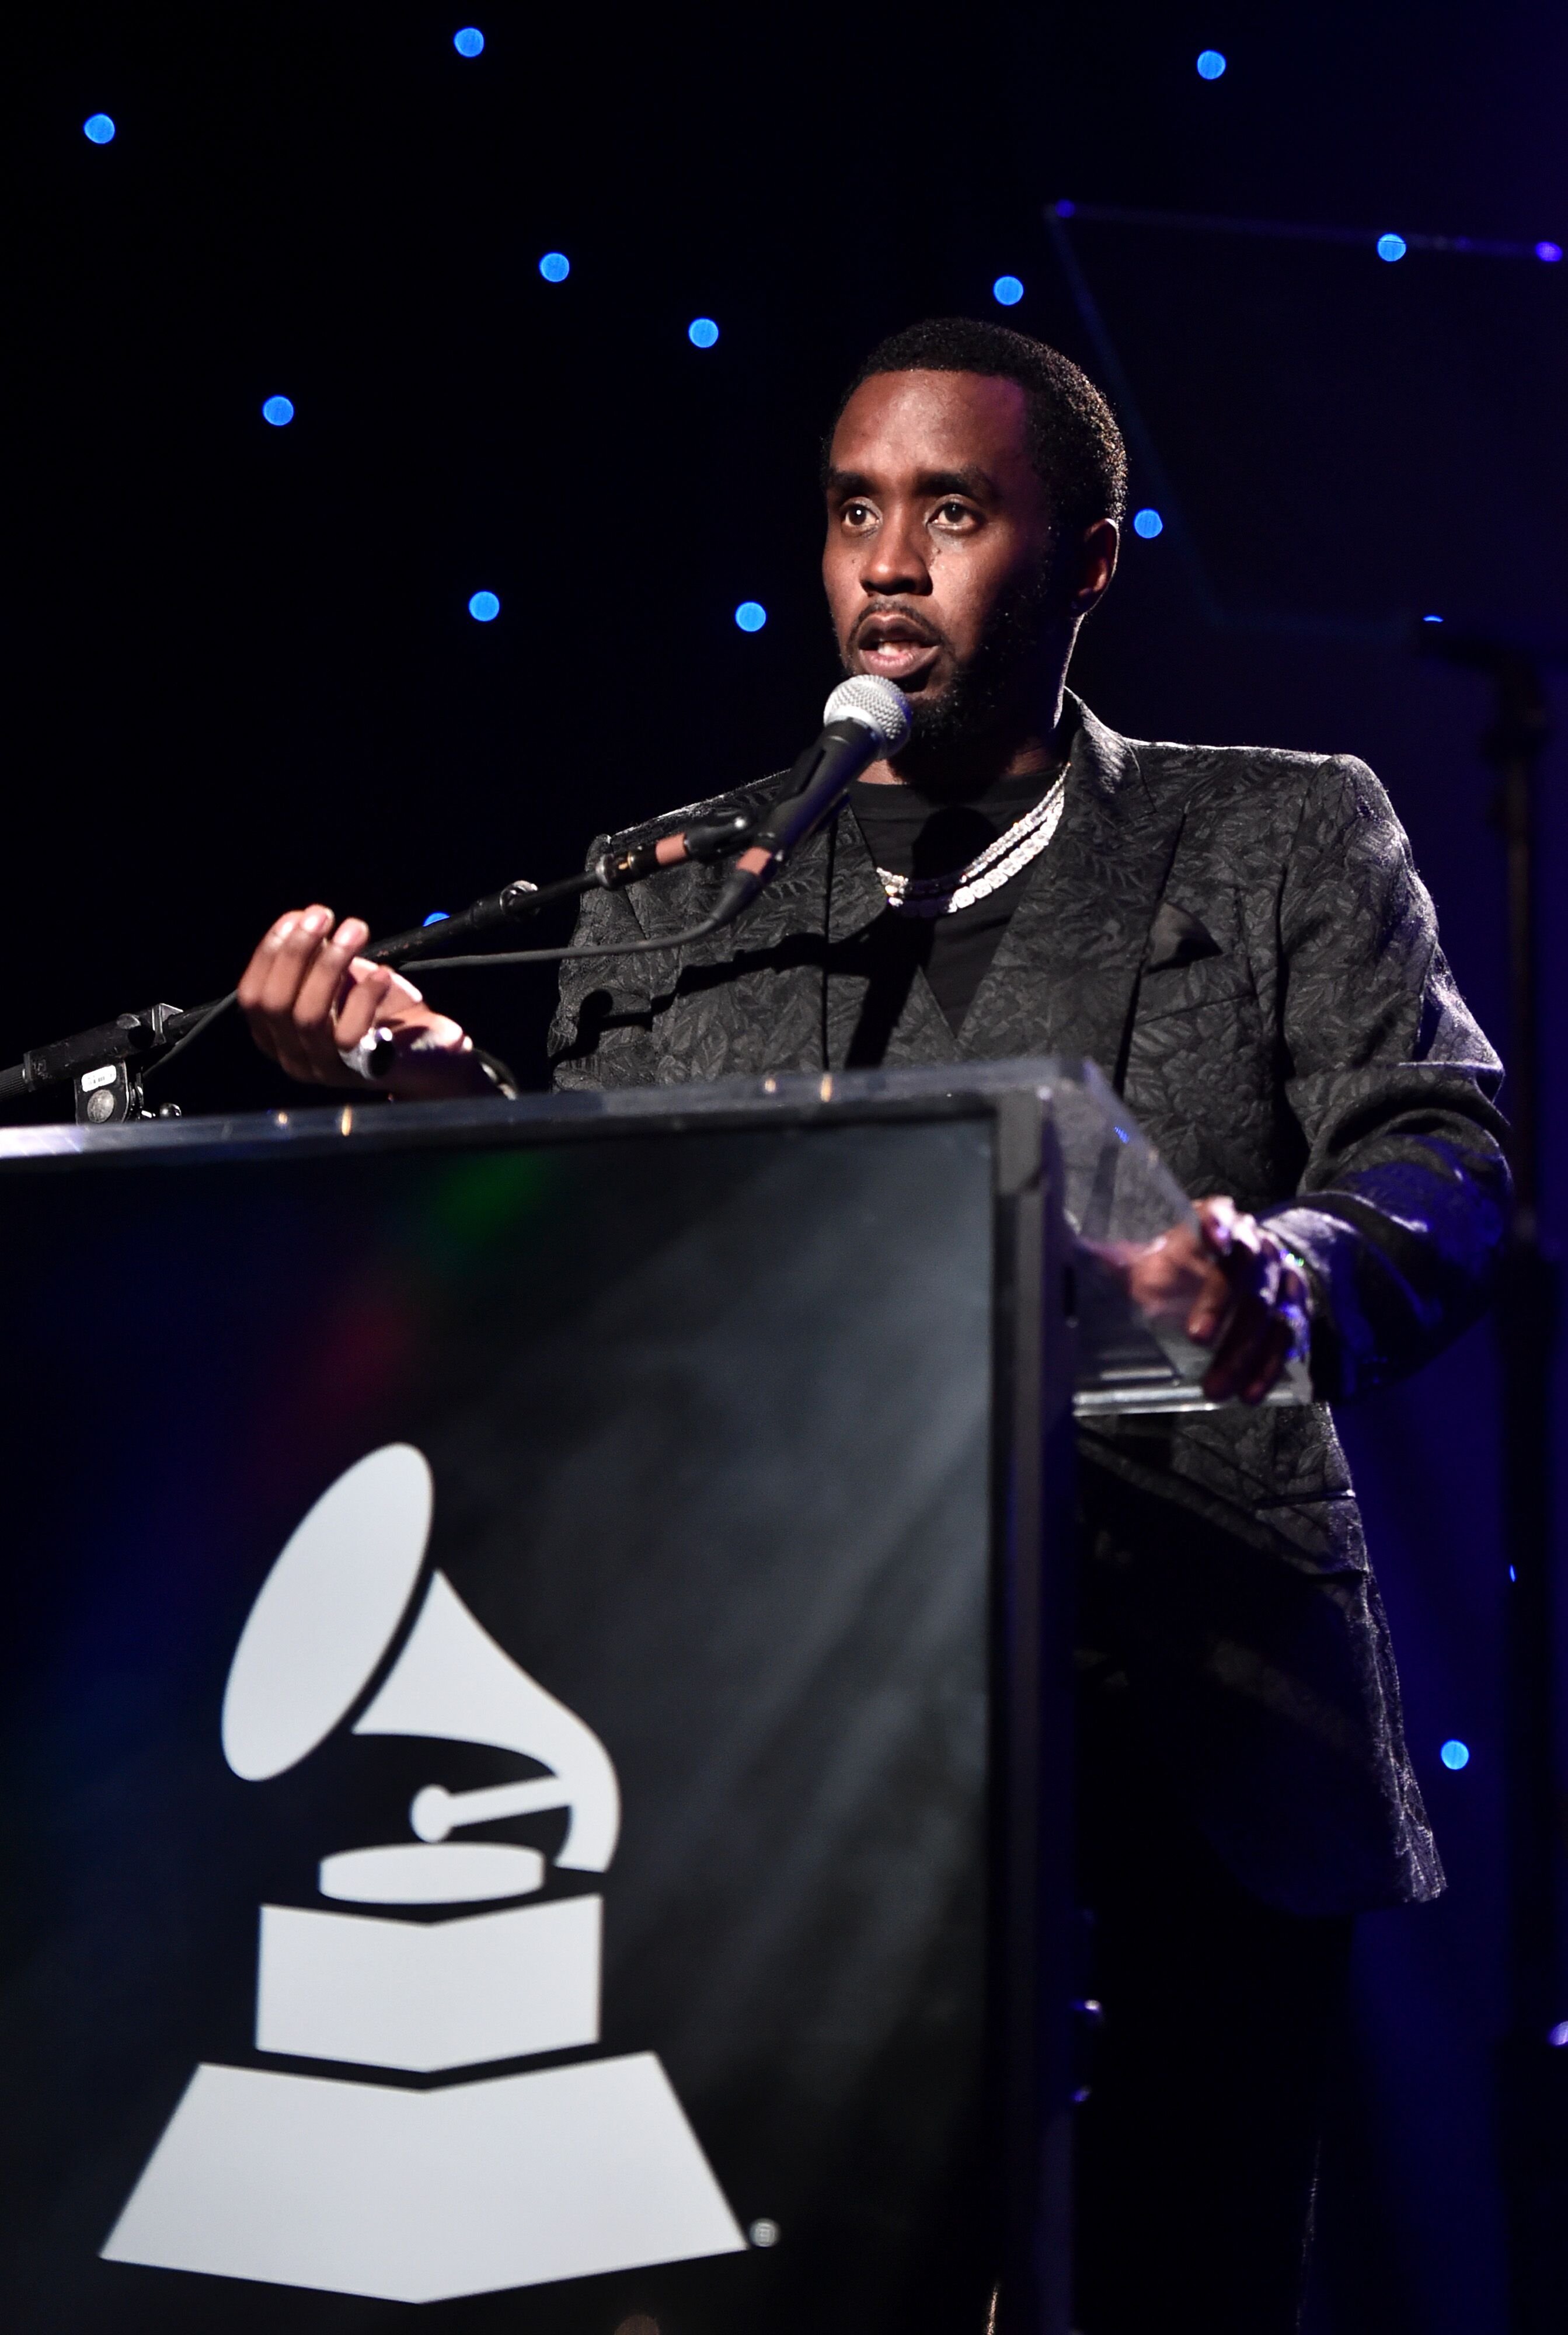 Sean "Diddy" Combs slams the Grammys on January 25, 2019/ Source: Getty Images